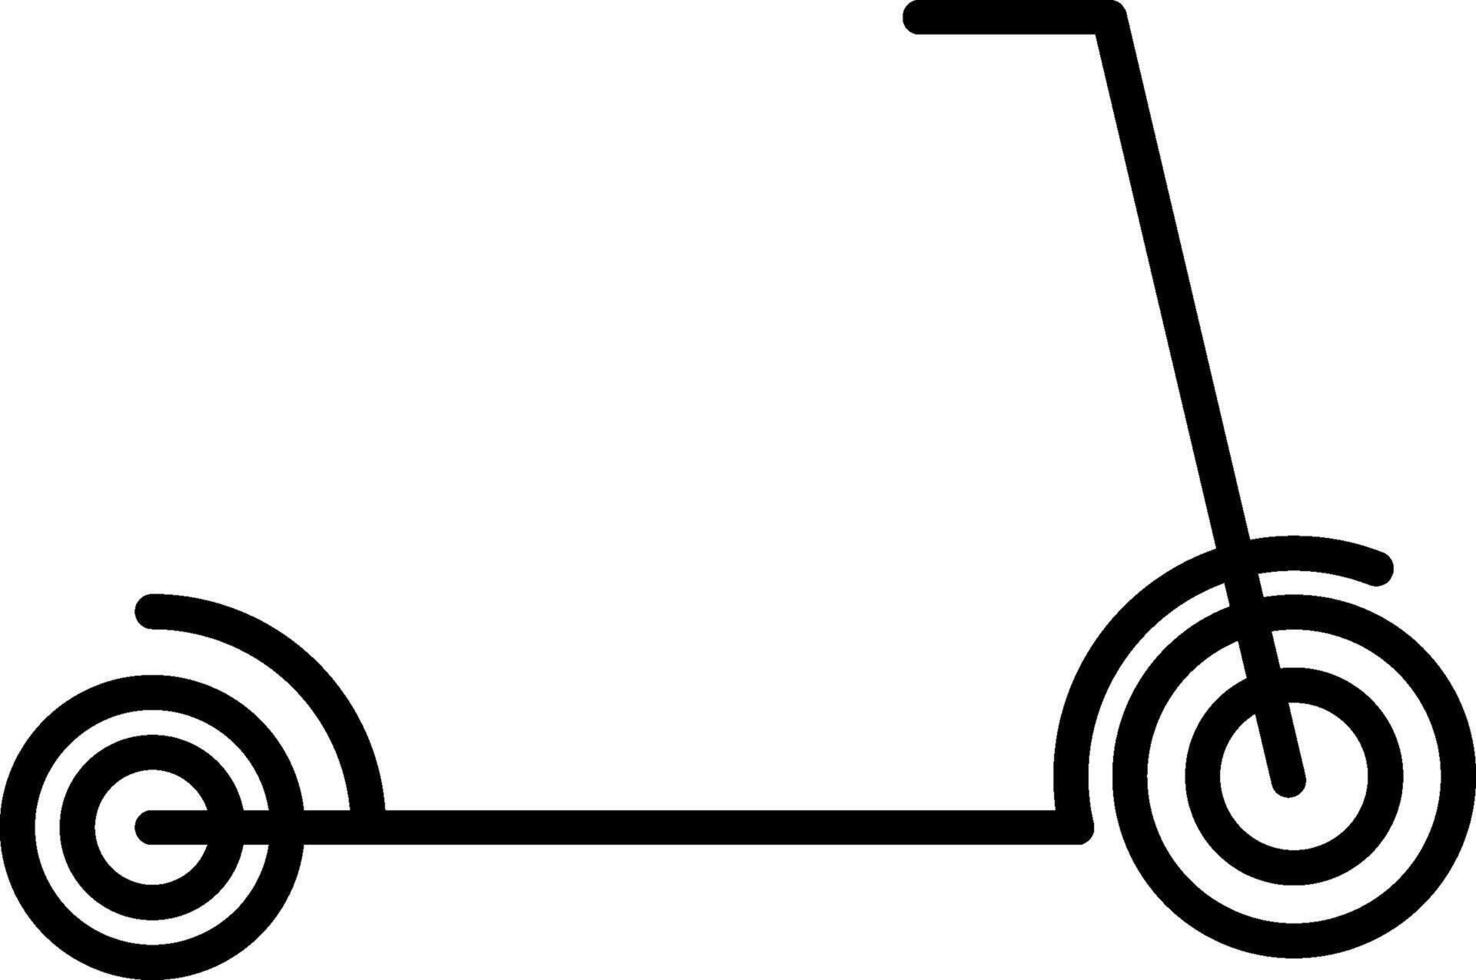 Kick Scooter Line Icon vector